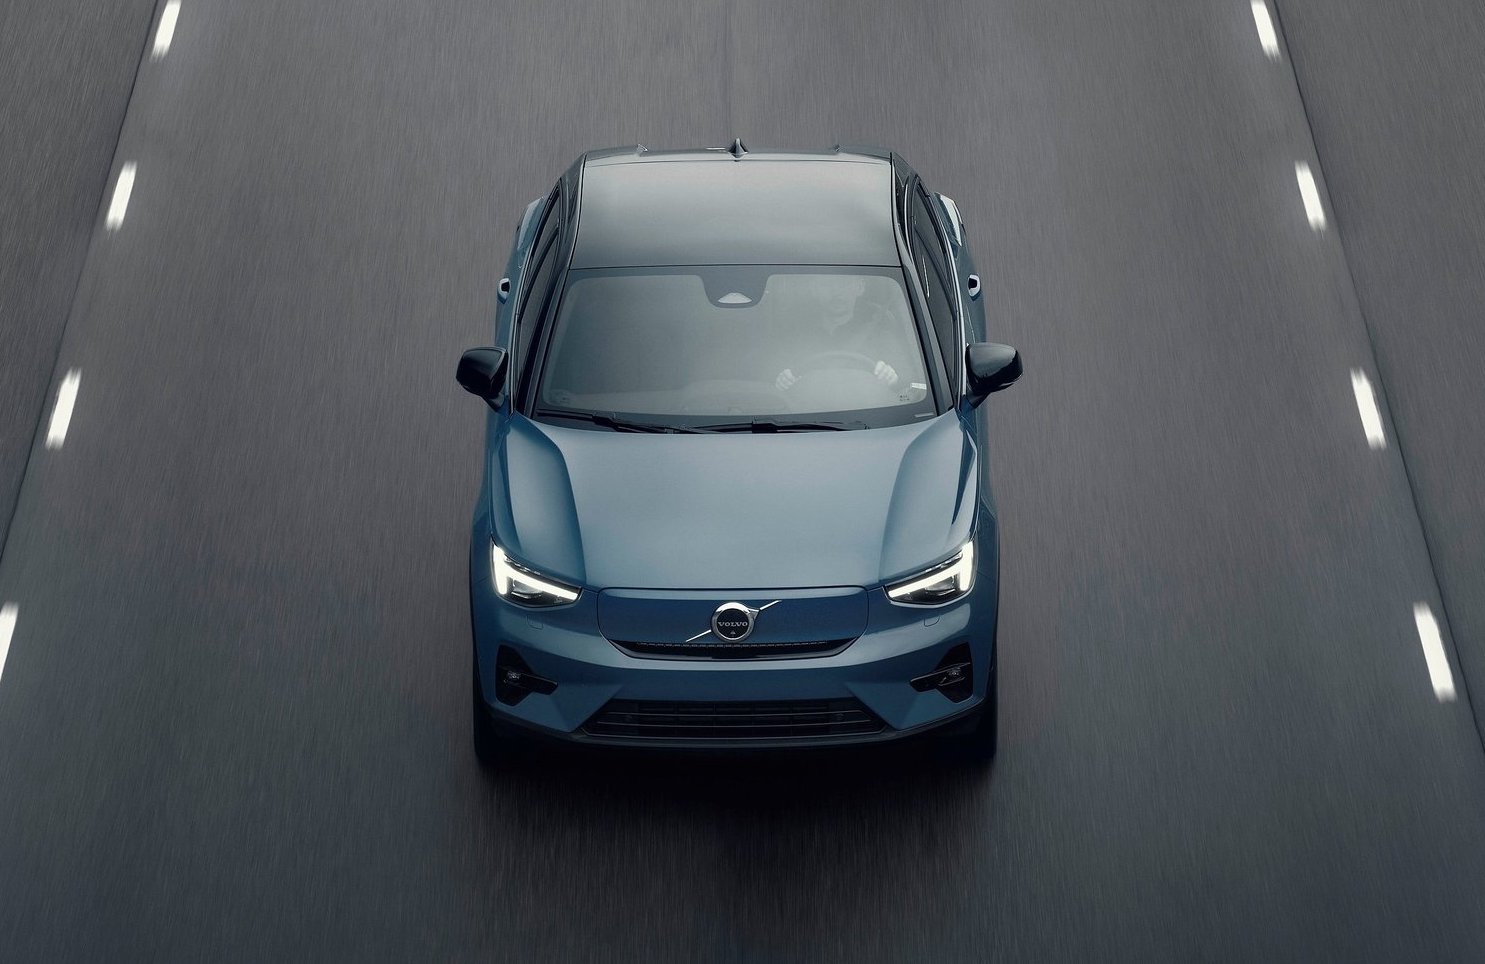 2023 Volvo C40 electric SUV confirmed for Australia, priced from $74,990